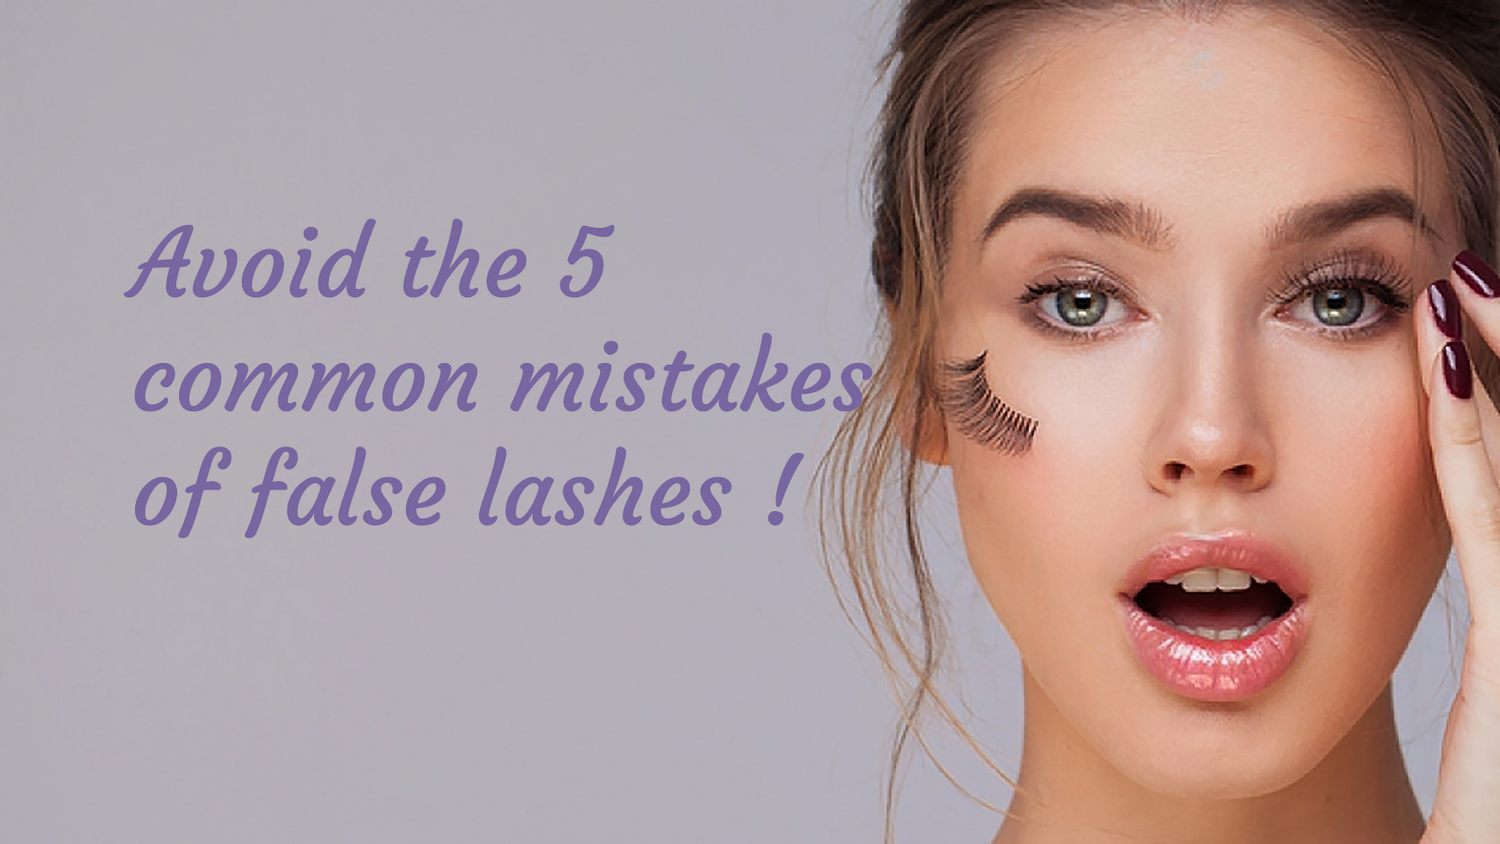 5 common mistakes of false lashes and how to avoid them